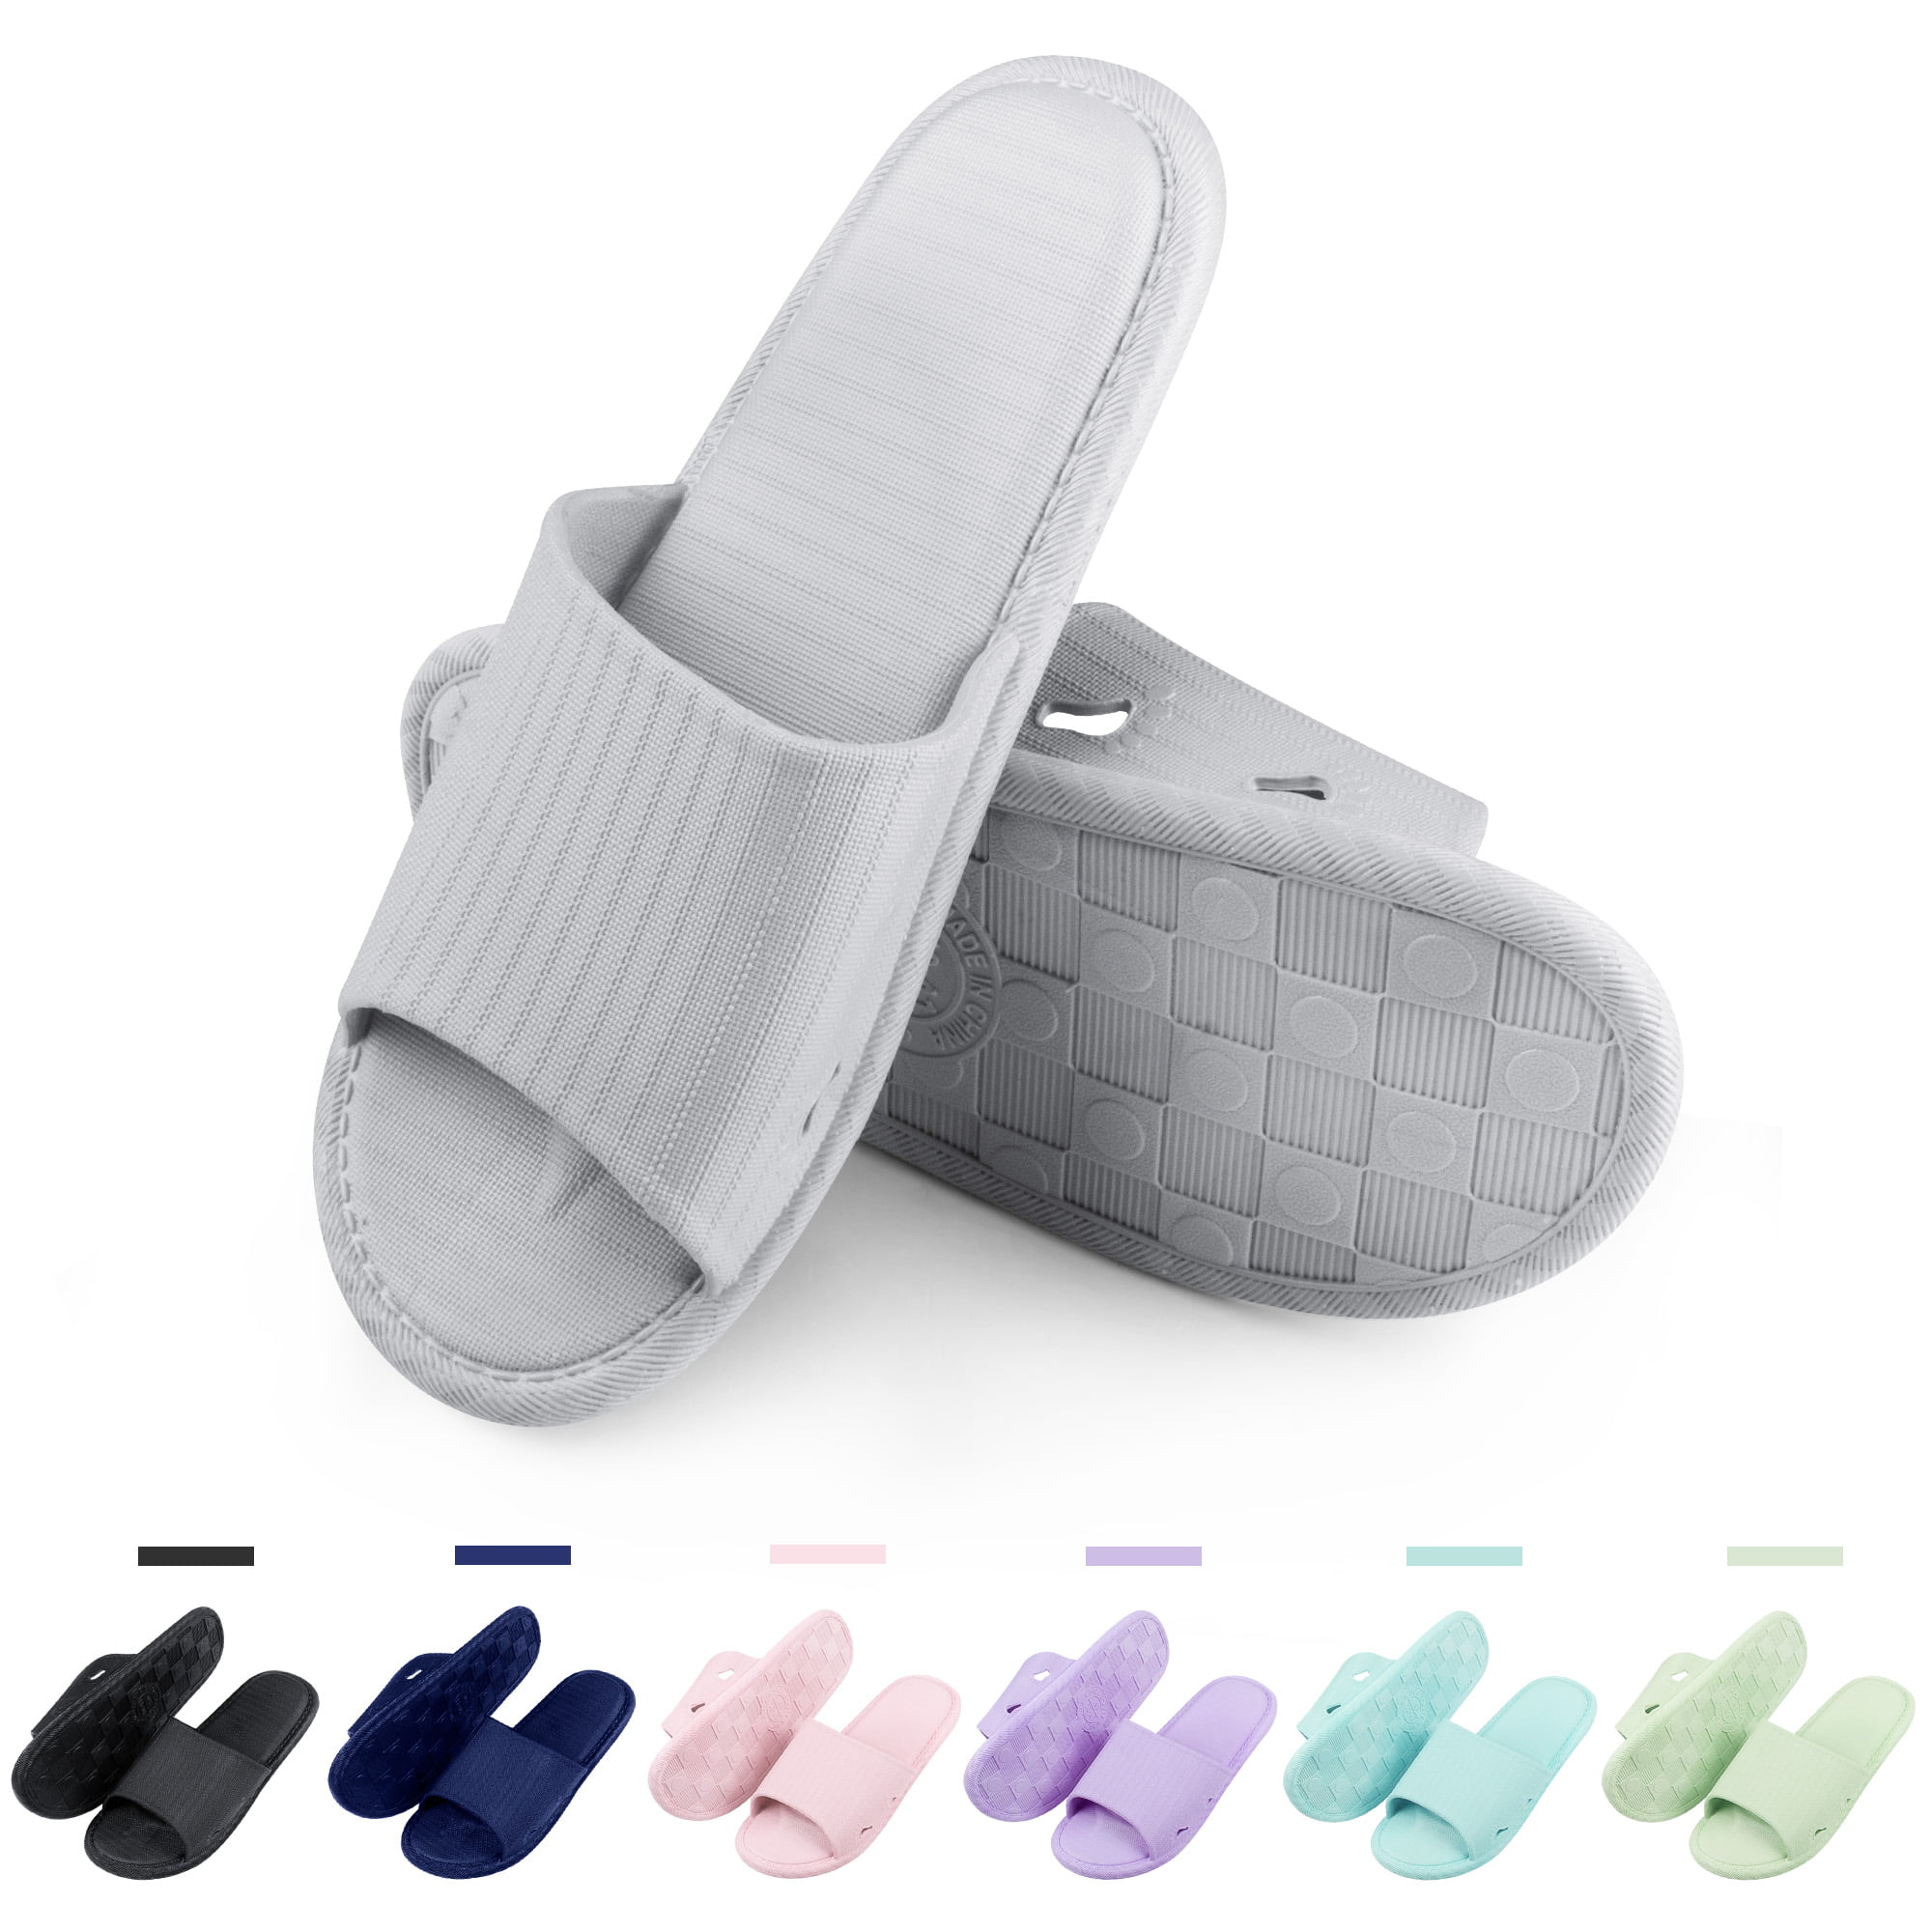 plain with side stripes on the sole. bathing slippers beach shoes Brandsseller Womens bathing slippers 